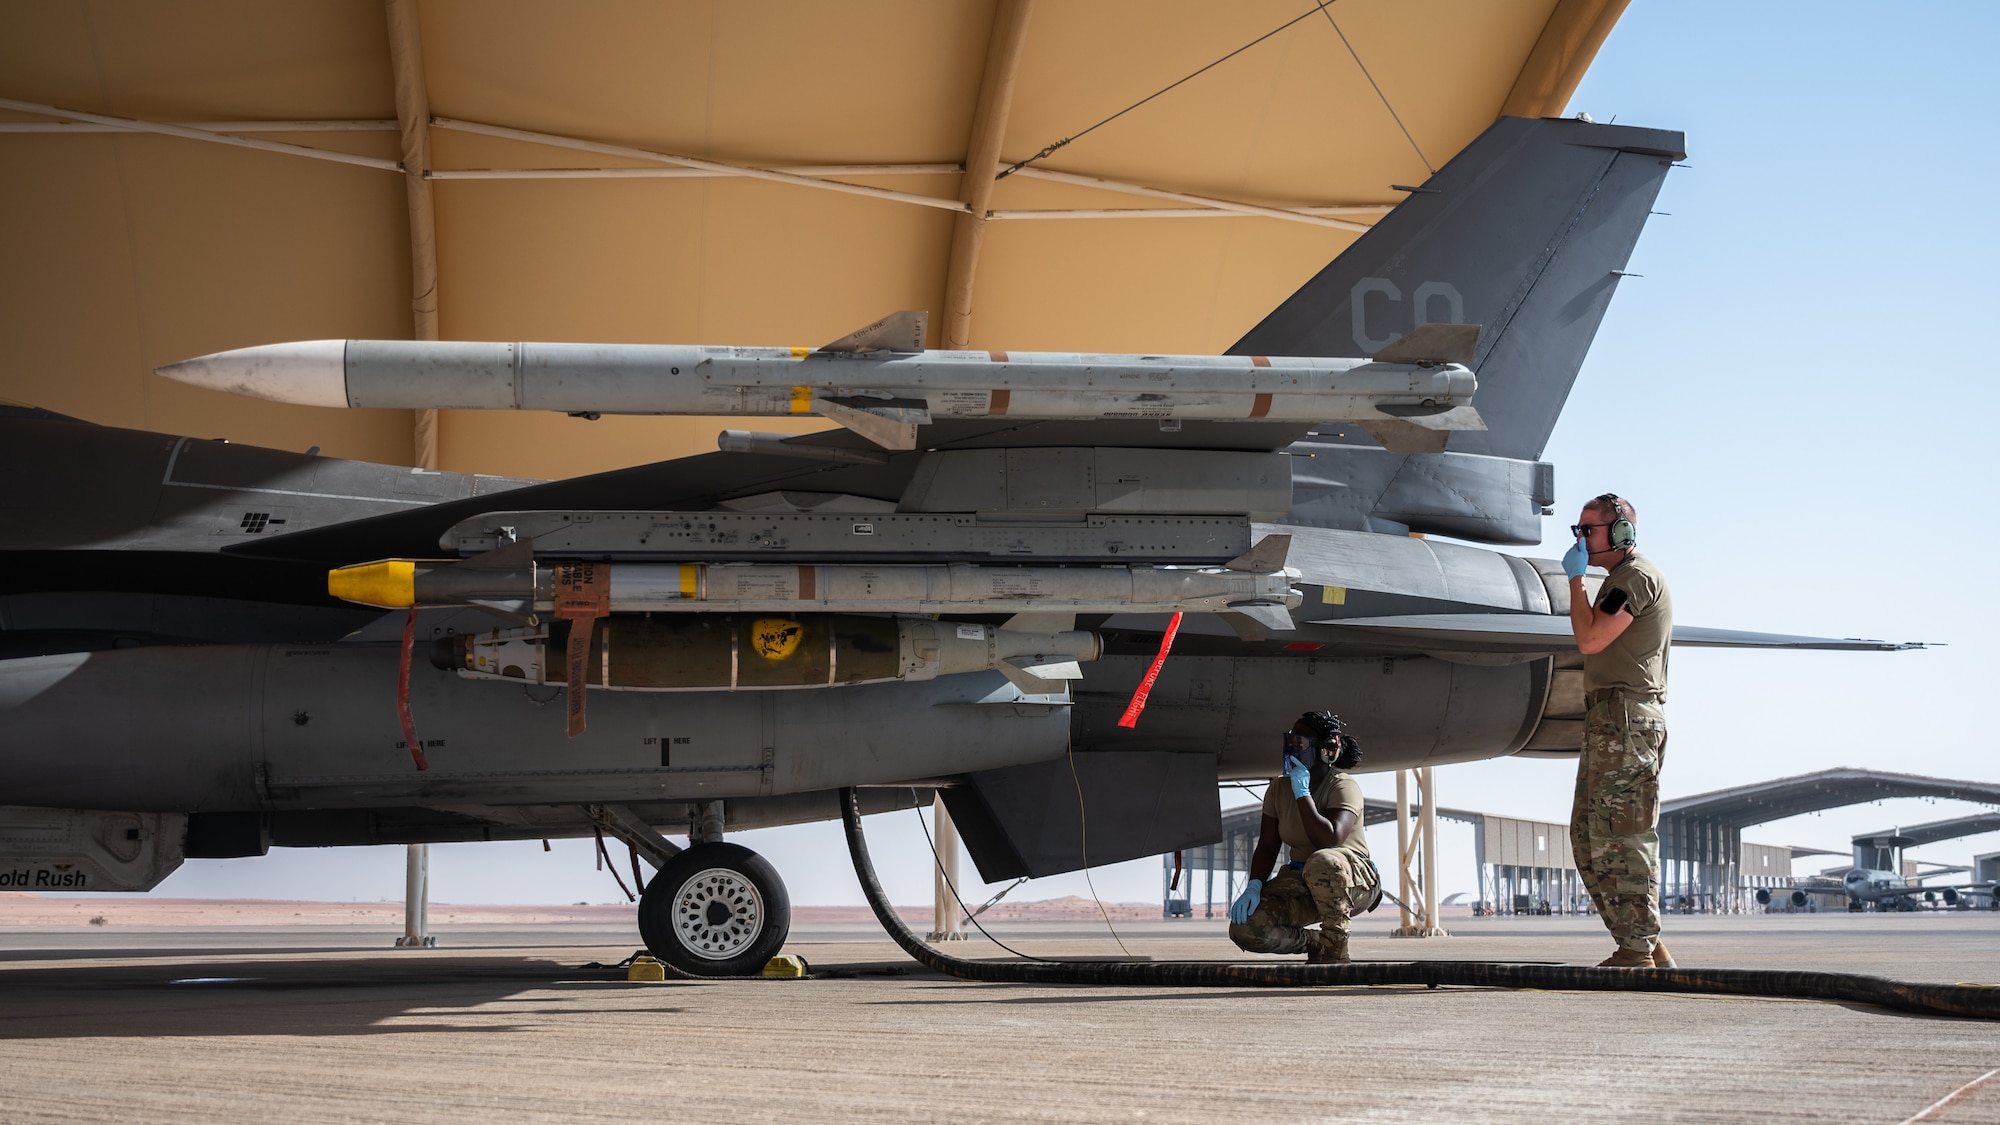 U.S. Air Force Tech. Sgt. Phyllis Sackey-Solomon, left, 379th Expeditionary Maintenance Squadron transient alert craftsman, and Master Sgt. Arik Armstrong, 378th EMXS quality assurance inspector, monitor the refueling of an F-16 Fighting Falcon at Prince Sultan Air Base, Kingdom of Saudi Arabia, Nov. 27, 2021. Sackey-Solomon was part of the group from Al Udeid Air Base, Qatar, who traveled to PSAB to become certified in refueling F-16s. (U.S. Air Force photo by Senior Airman Jacob B .Wrightsman)